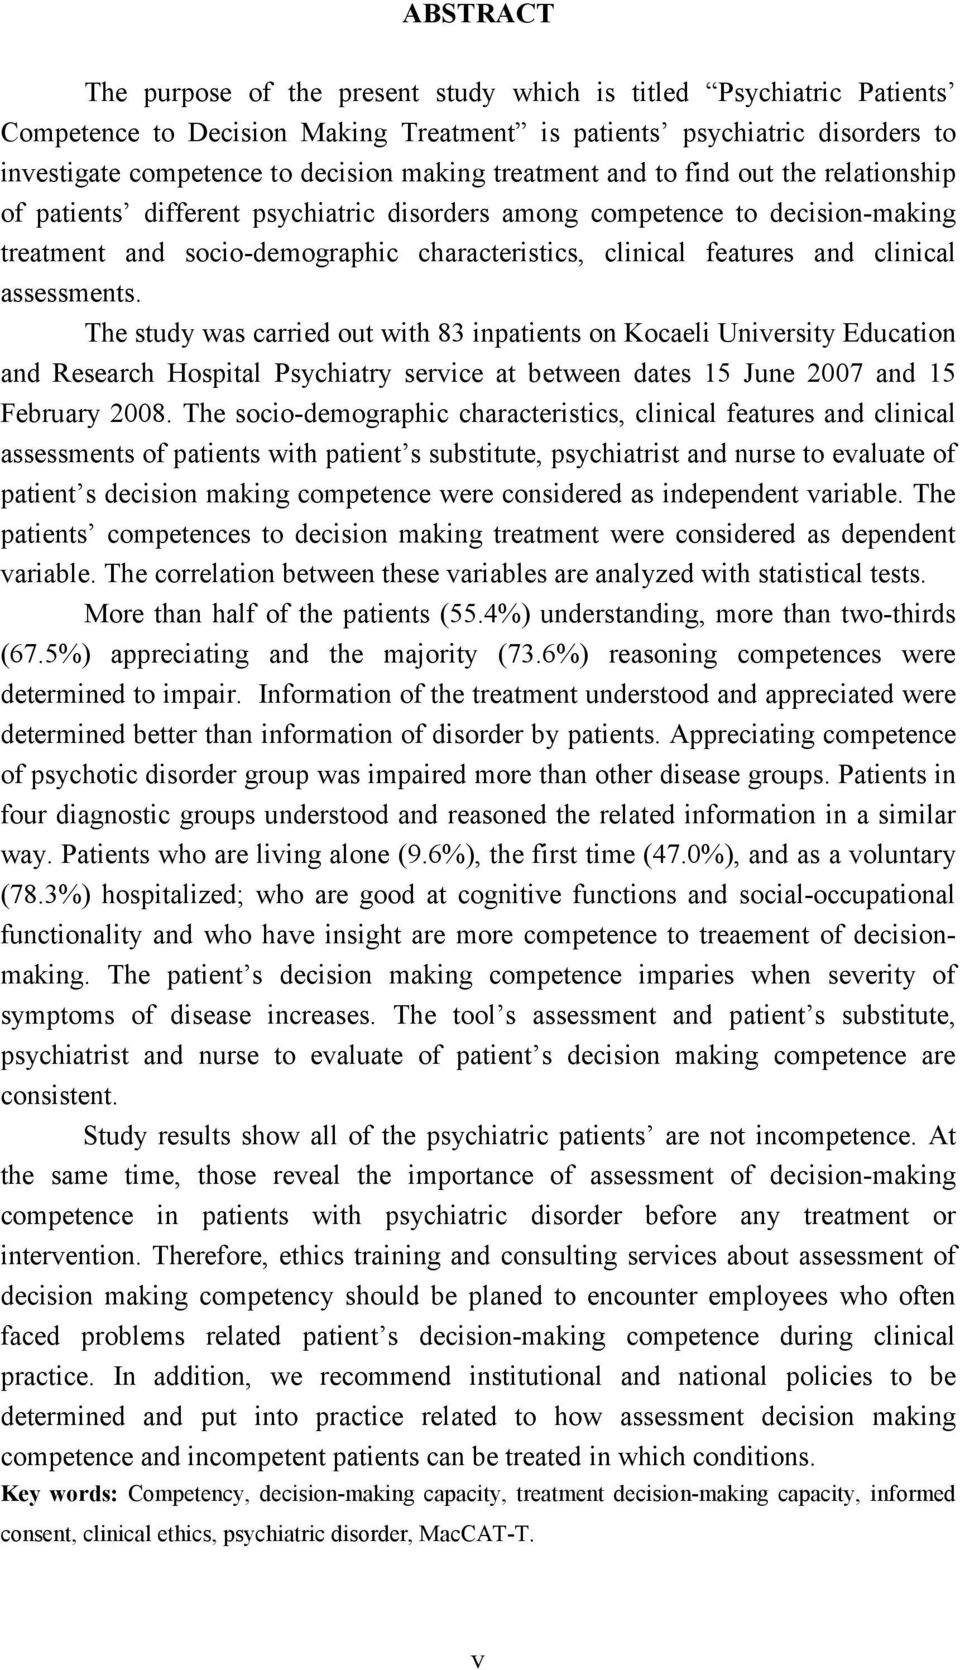 clinical assessments. The study was carried out with 83 inpatients on Kocaeli University Education and Research Hospital Psychiatry service at between dates 15 June 2007 and 15 February 2008.